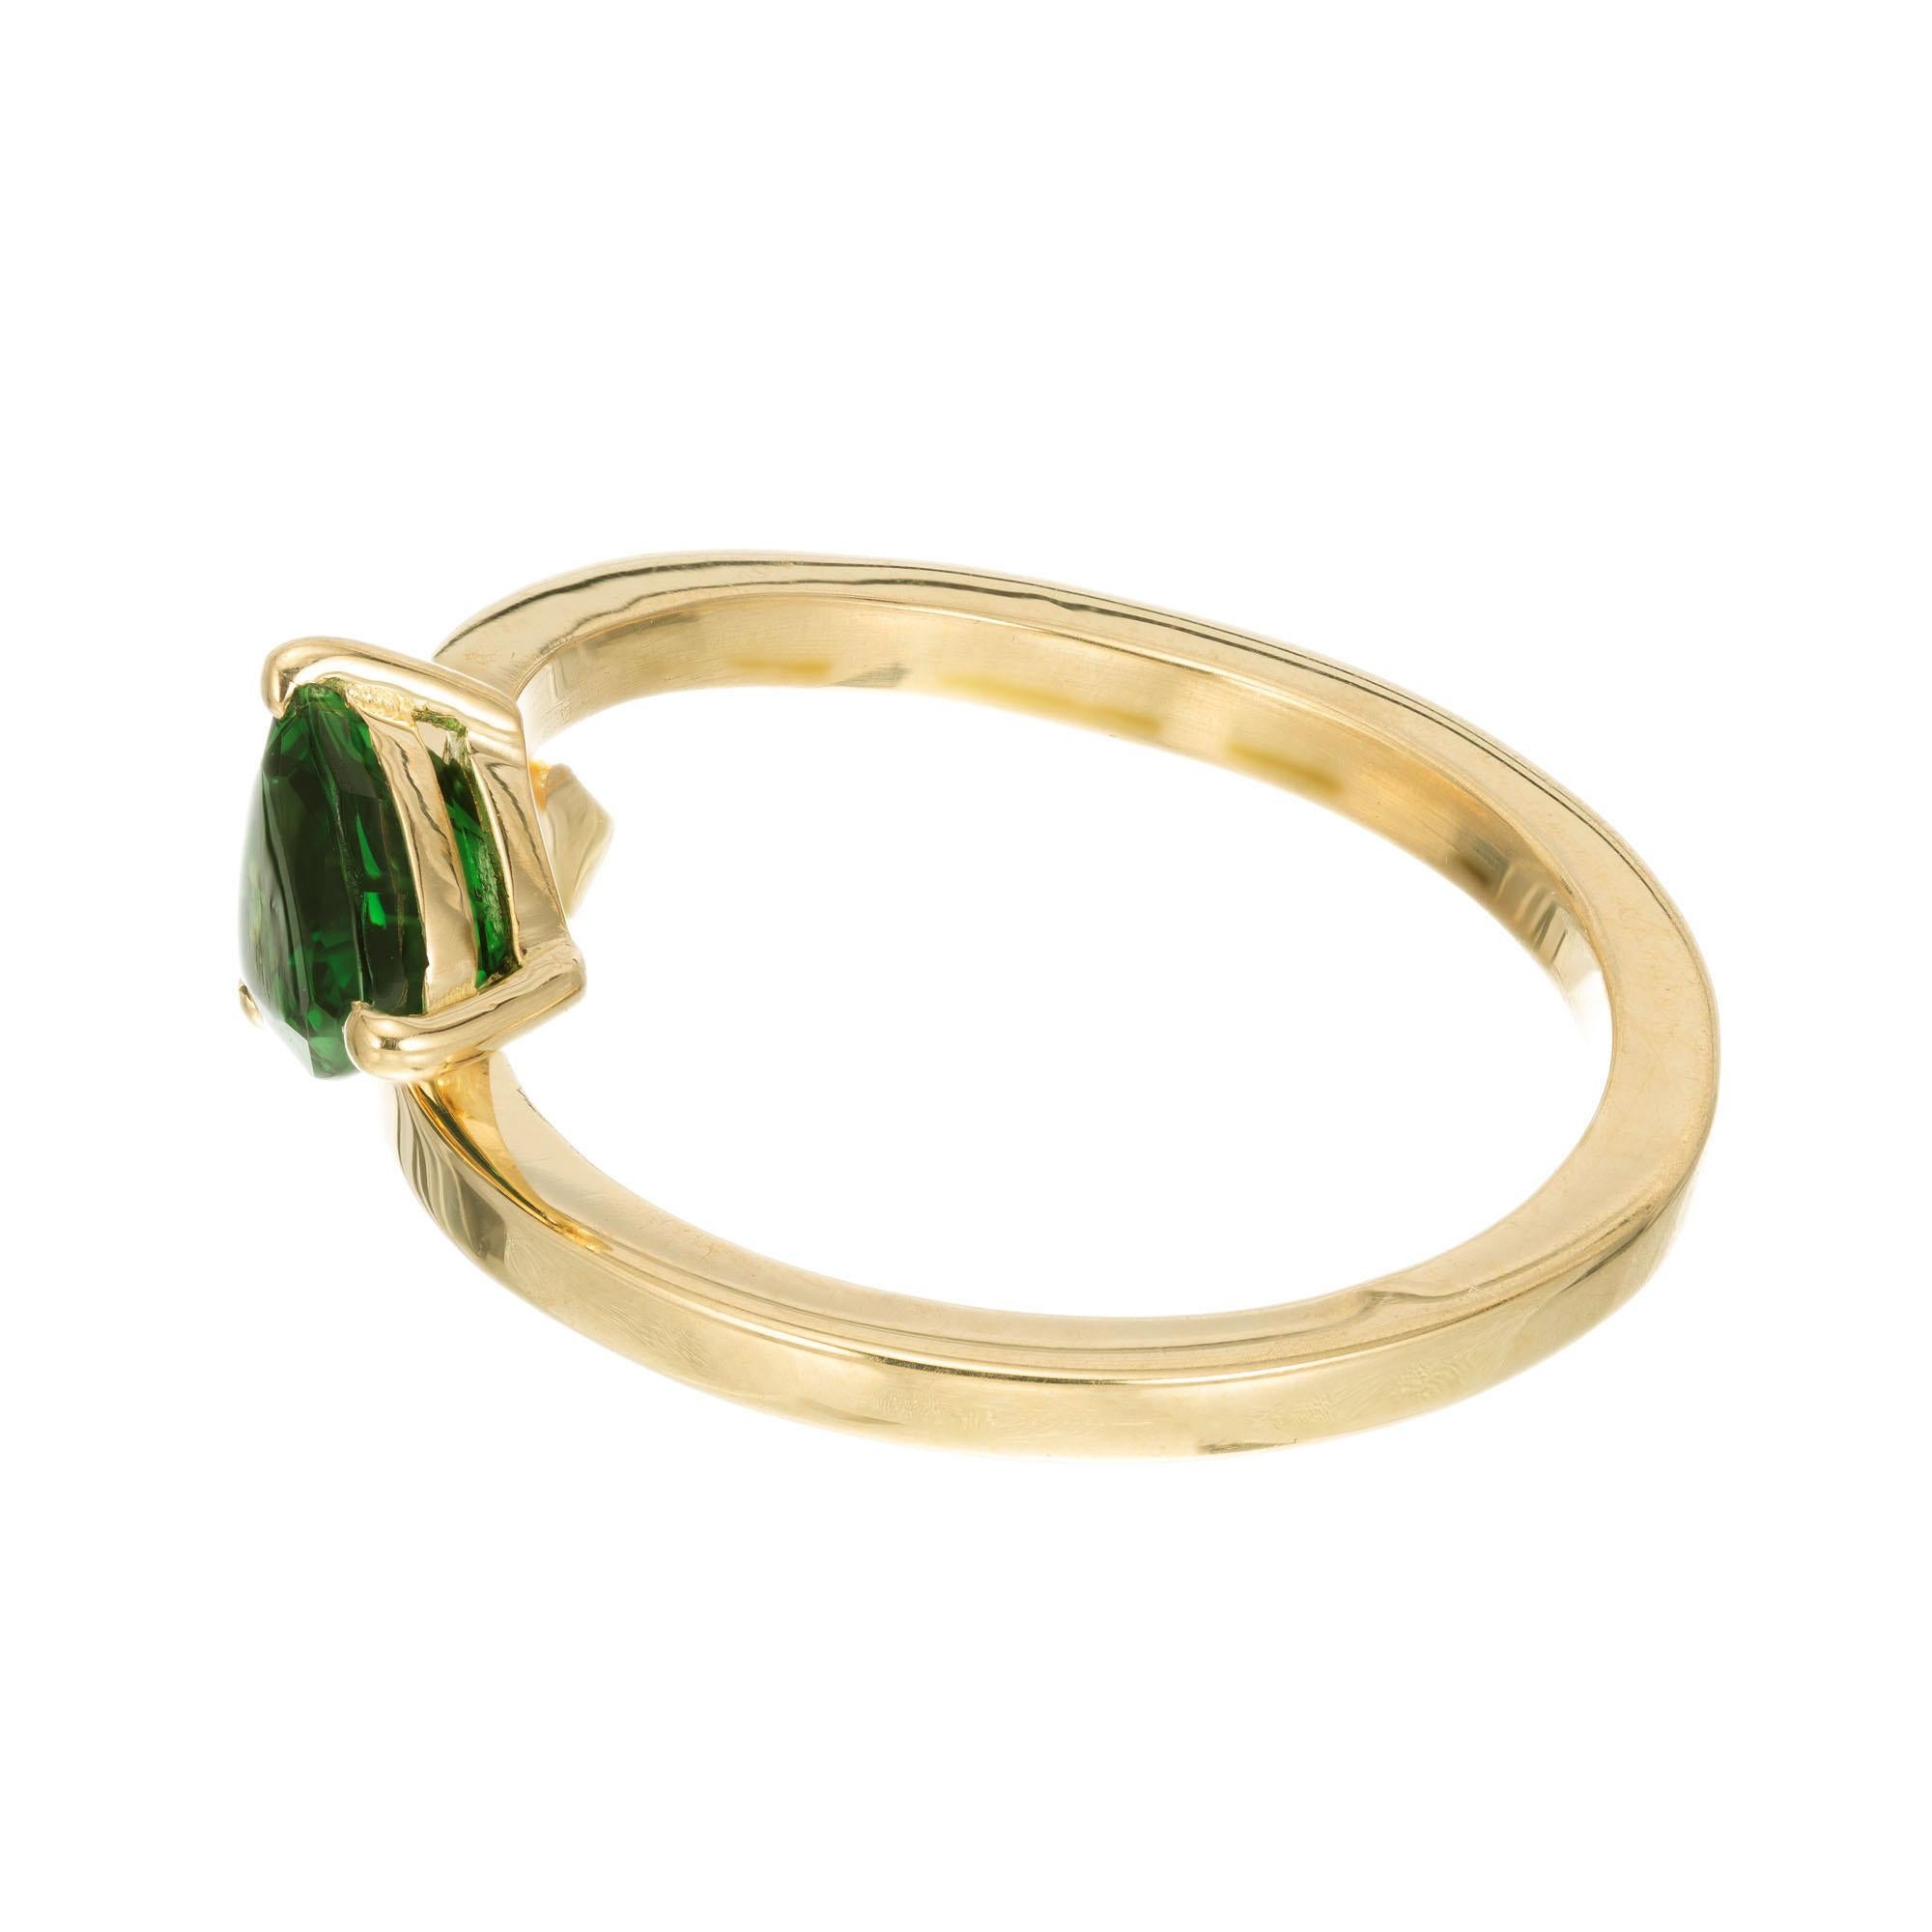 Peter Suchy GIA Certified .96 Carat Tsavorite Garnet Yellow Gold Arrow Ring In New Condition For Sale In Stamford, CT